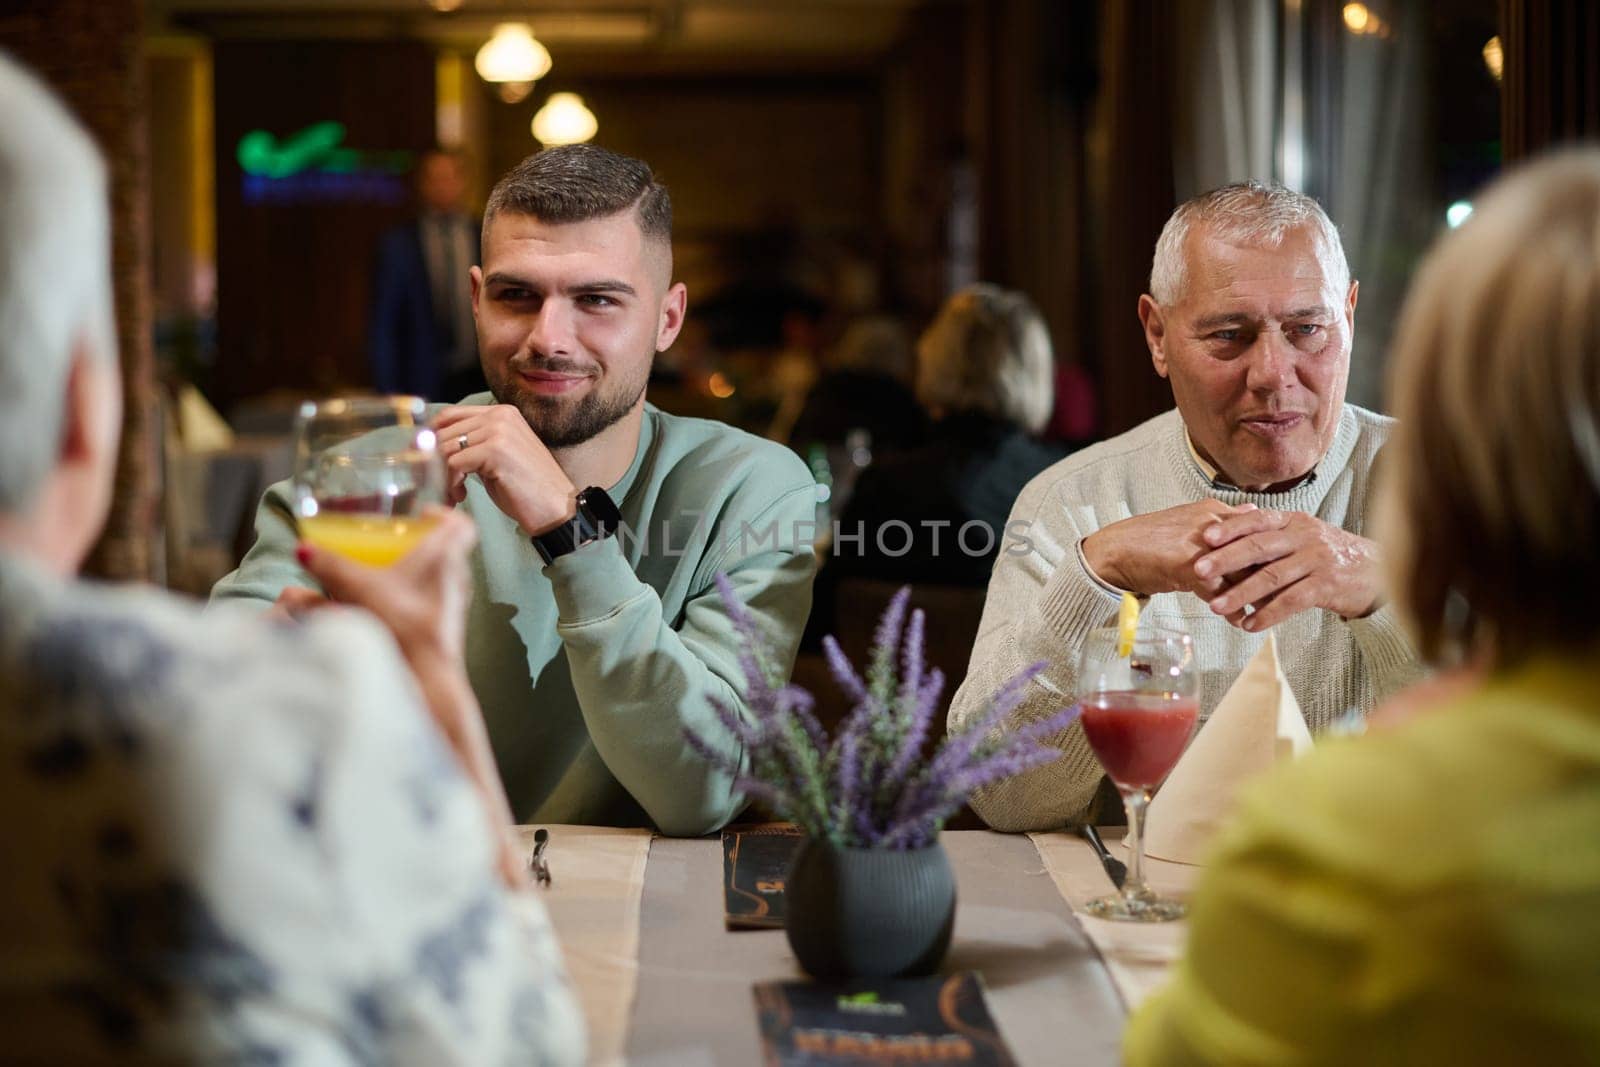 A group of family friends, comprising a young grandson and older individuals, share a delightful dinner in a modern restaurant, exemplifying the concept of healthy aging through intergenerational bonding and a joyous dining experience by dotshock